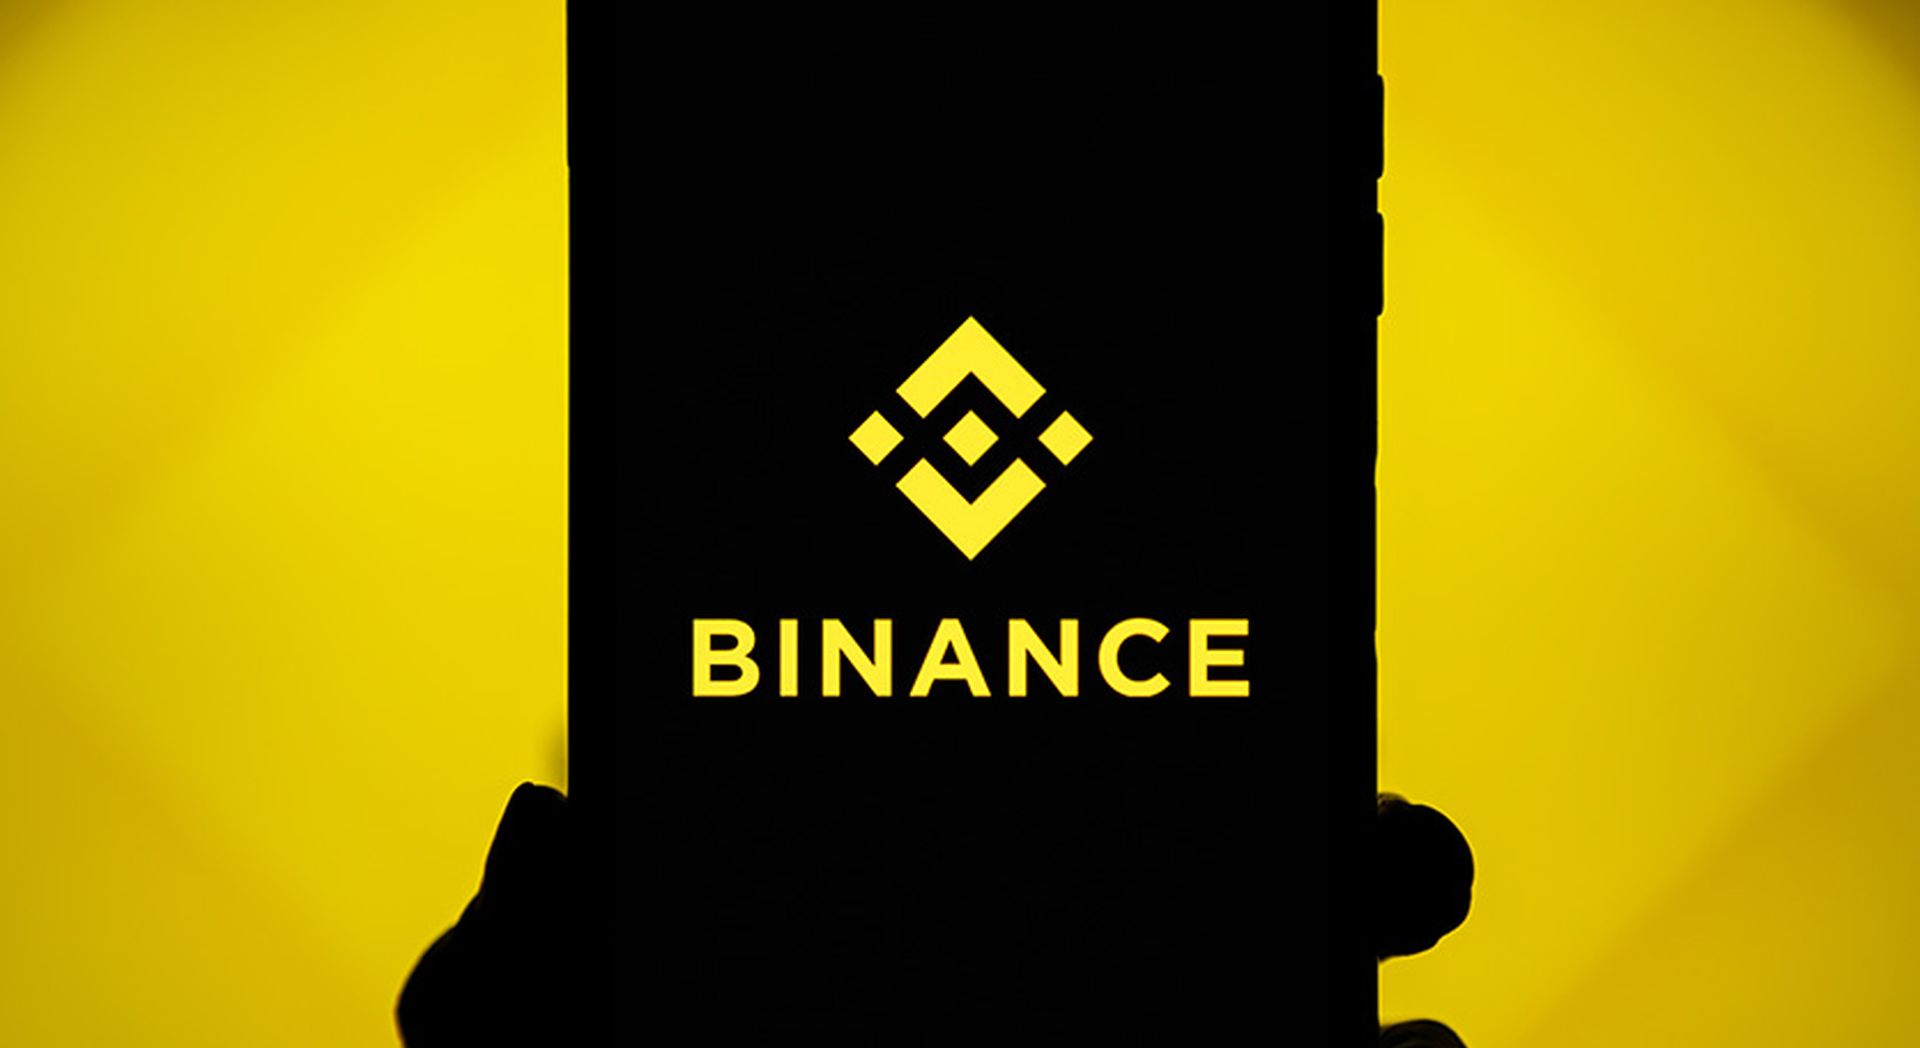 Binance backs out of FTX deal, the business said on Wednesday, threatening Sam Bankman-crypto Fried's empire. The decision comes only one day after Binance...